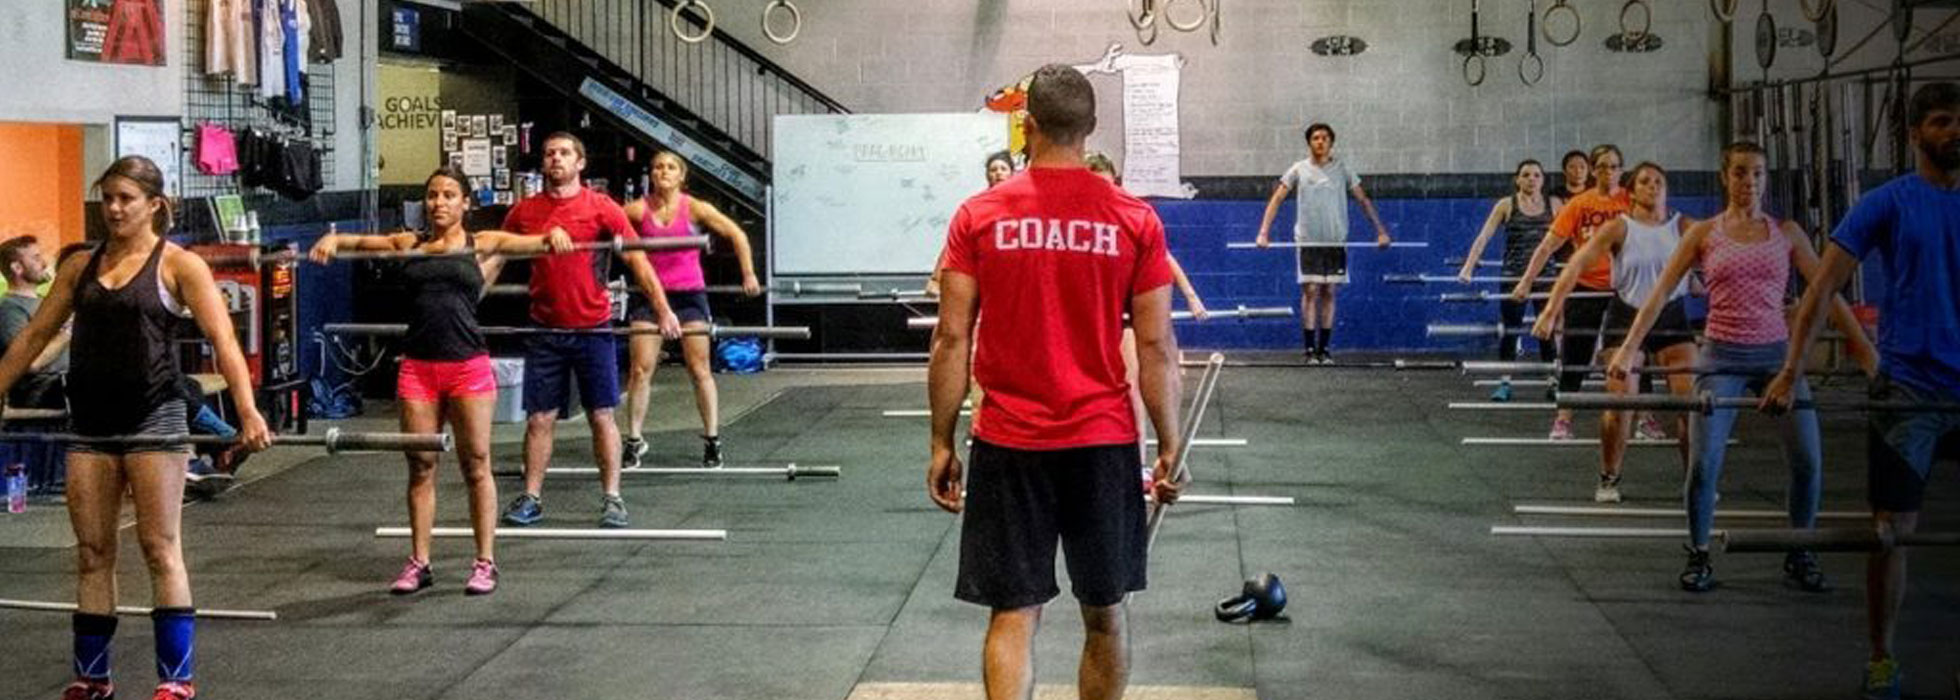 CrossFit Training in West Chester PA, CrossFit Training near Downingtown PA, CrossFit Training near Glen Mills PA, CrossFit Training near Malvern PA